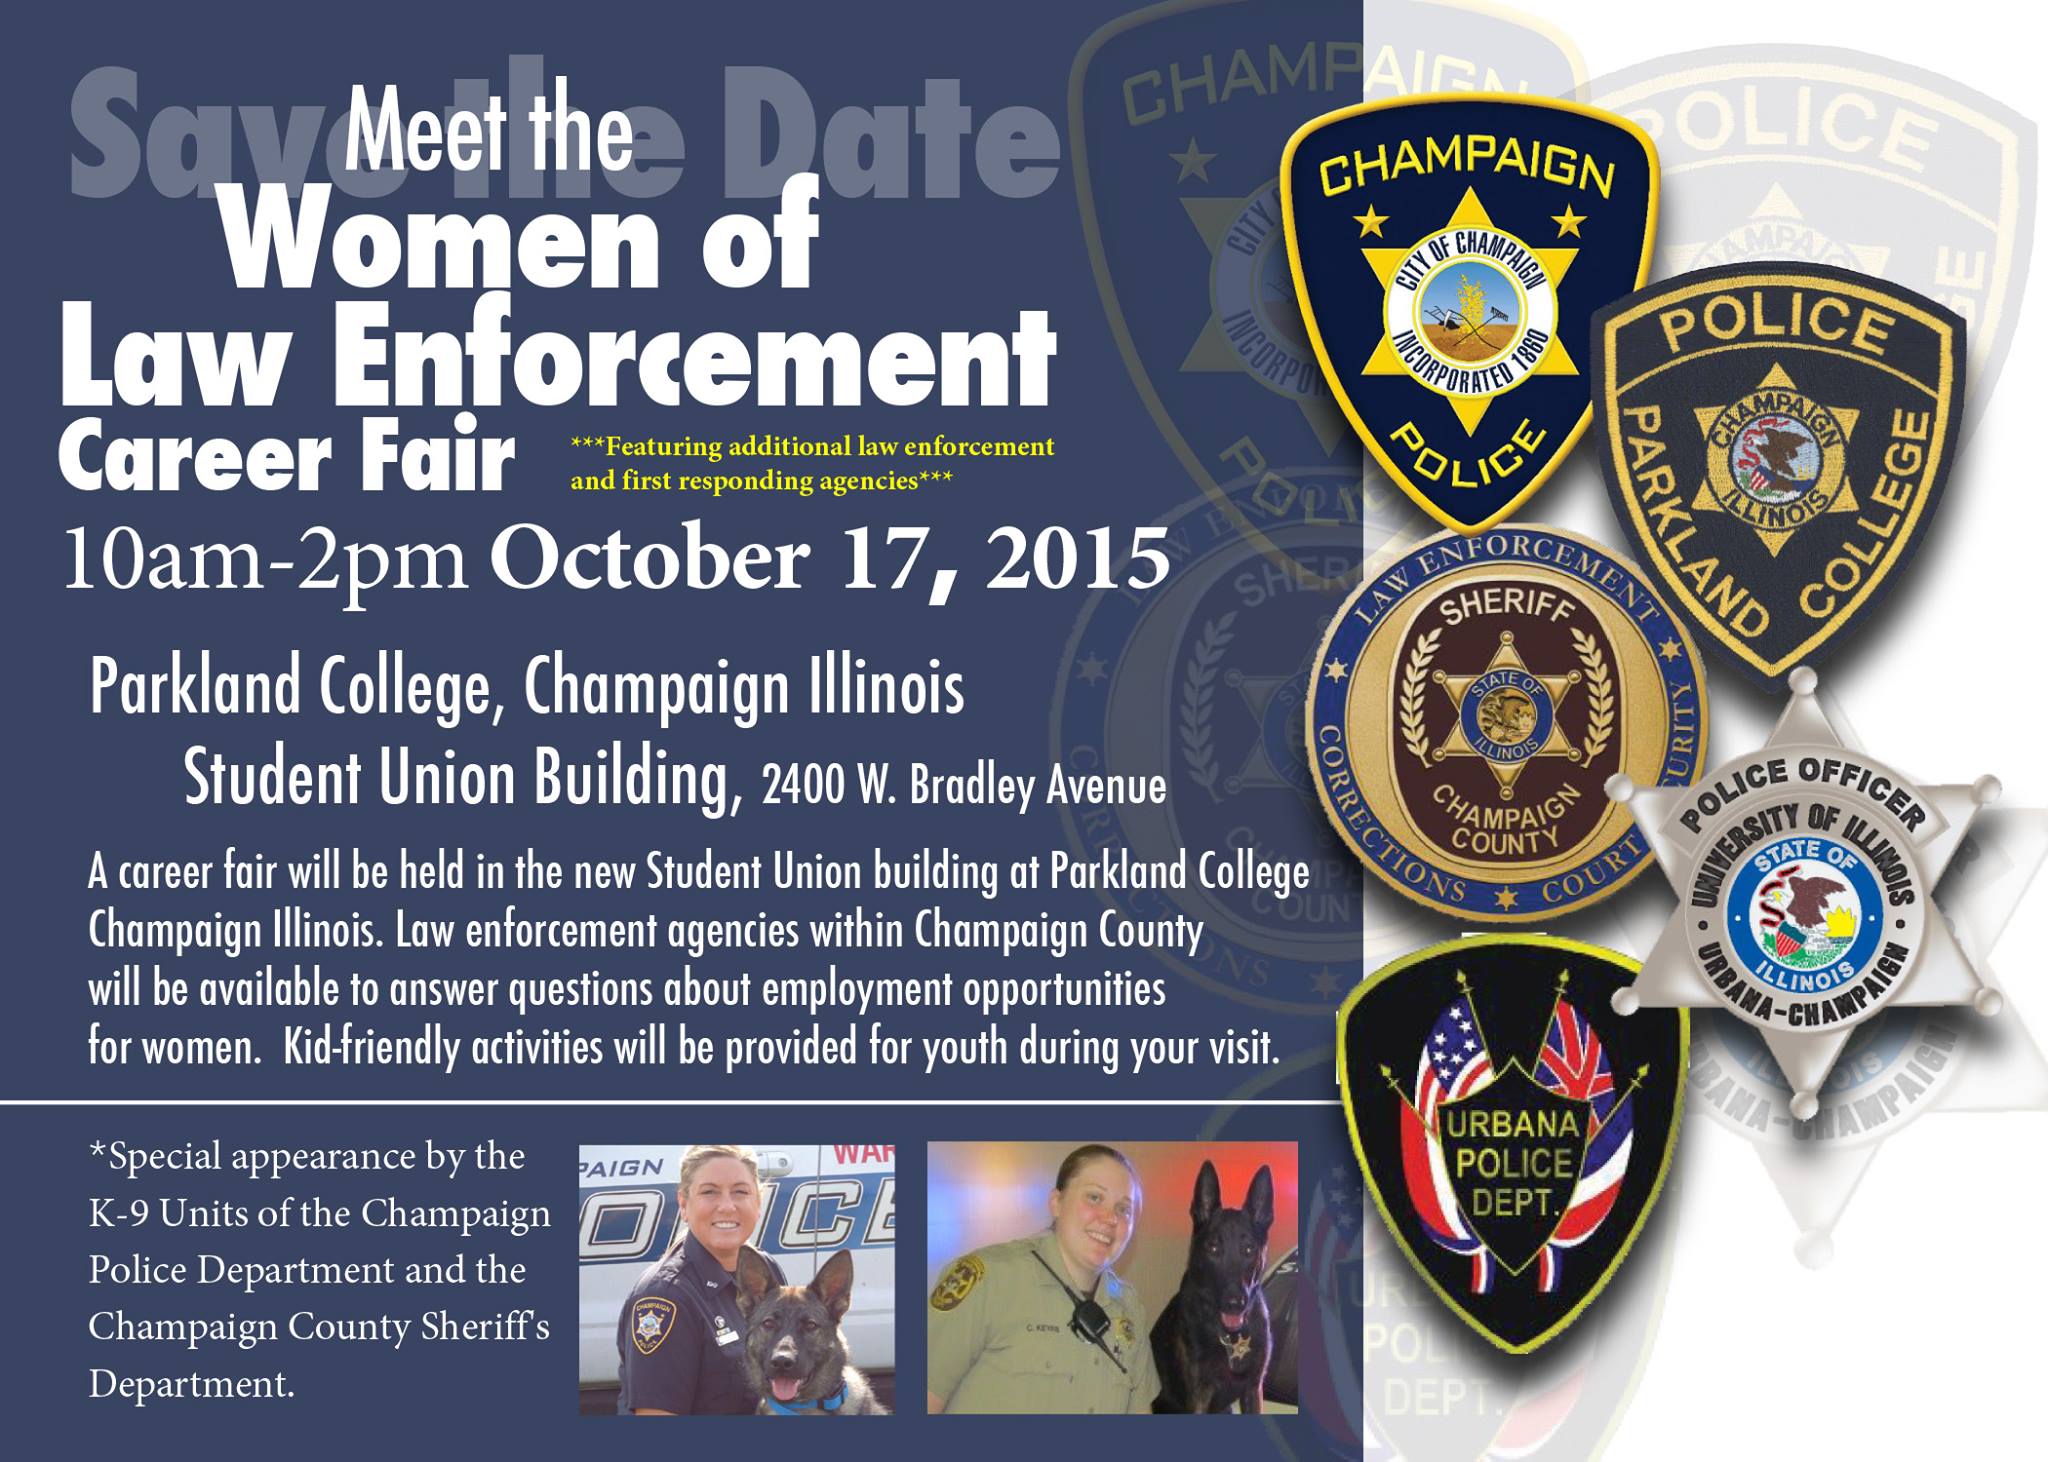 Graphic about the Women of Law Enforcement Career Fair.